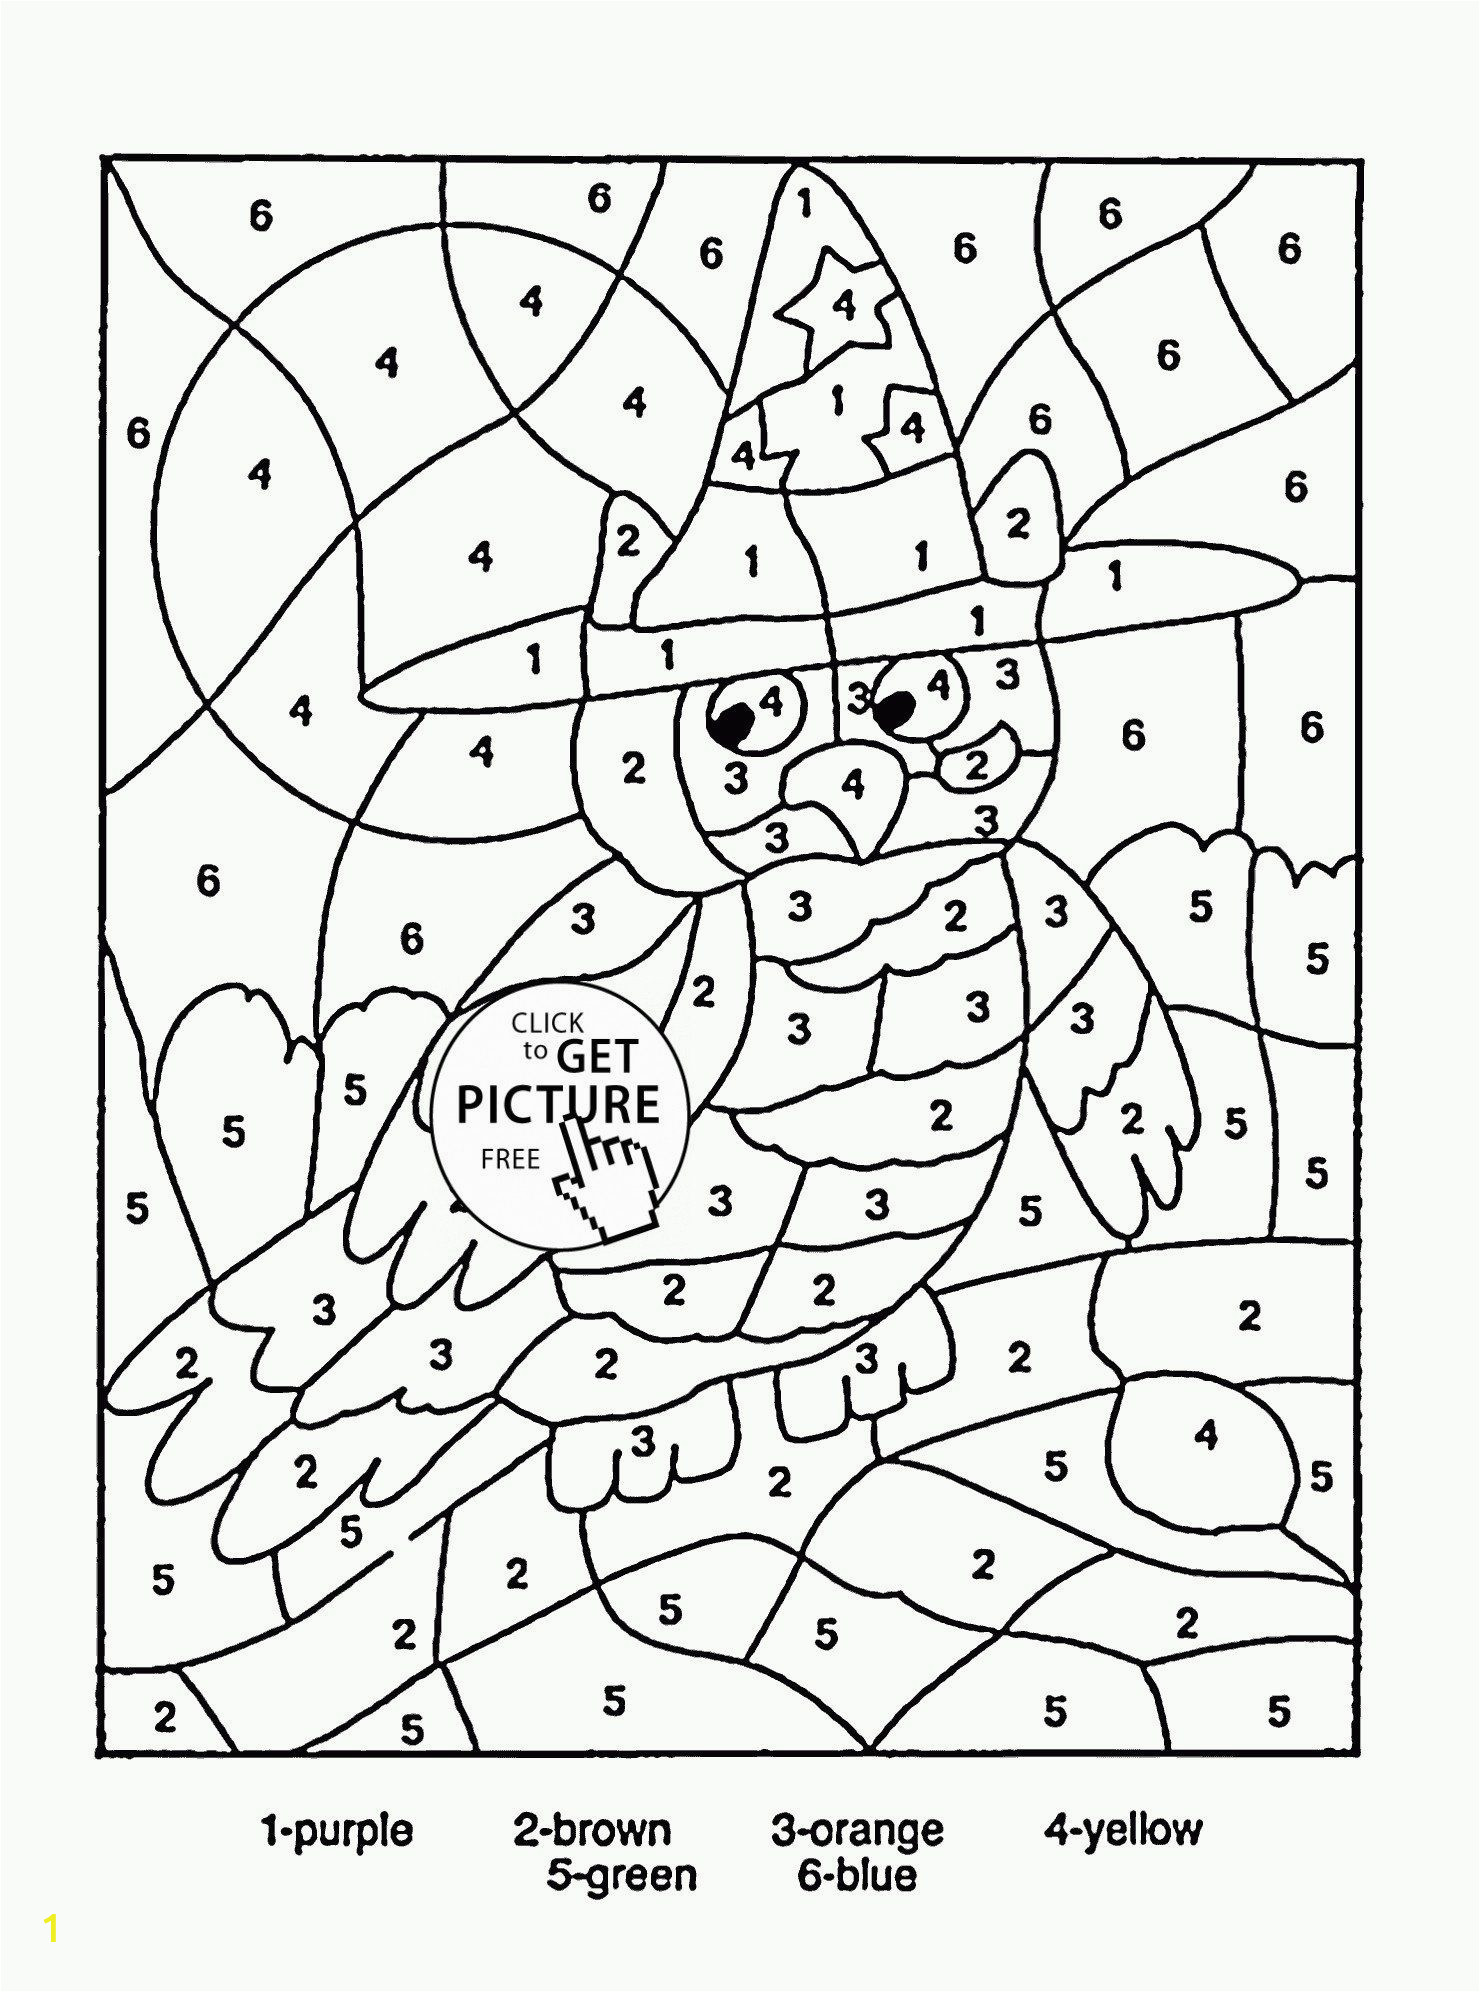 Free Online Color by Number Coloring Pages Color by Number Coloring Books Awesome 22 Mosaic Color by